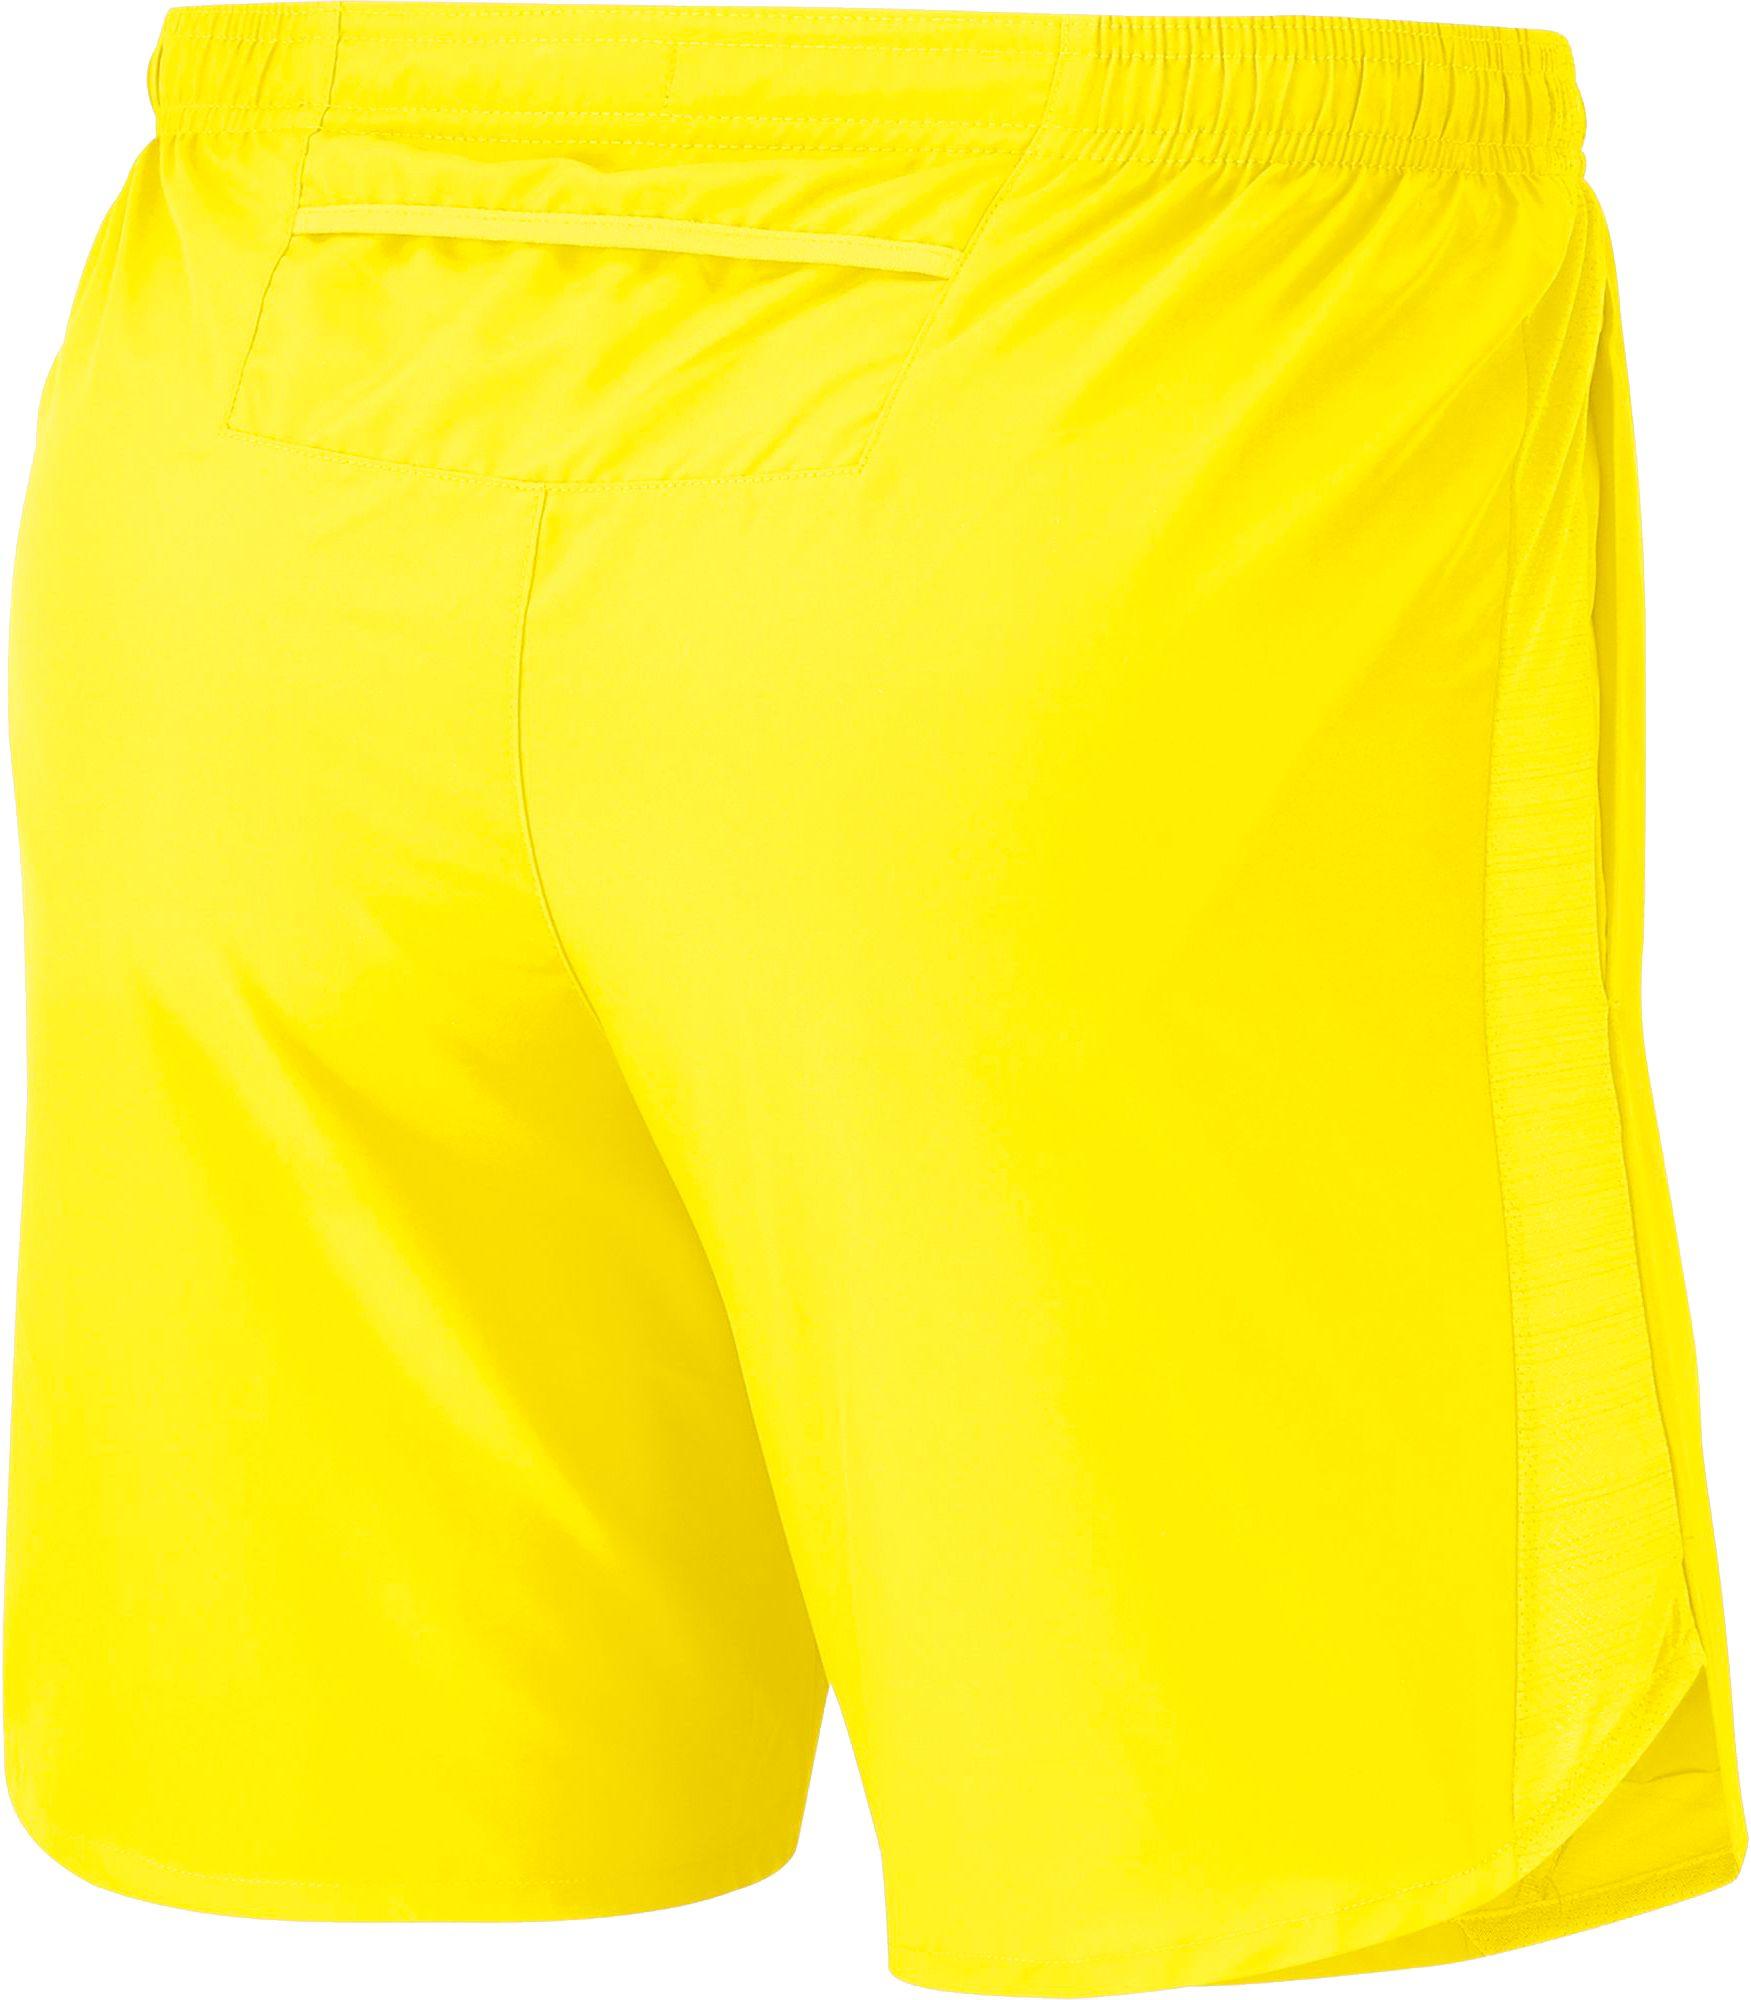 Nike Challenger Dri-fit 7'' Running Shorts in Yellow for Men - Lyst